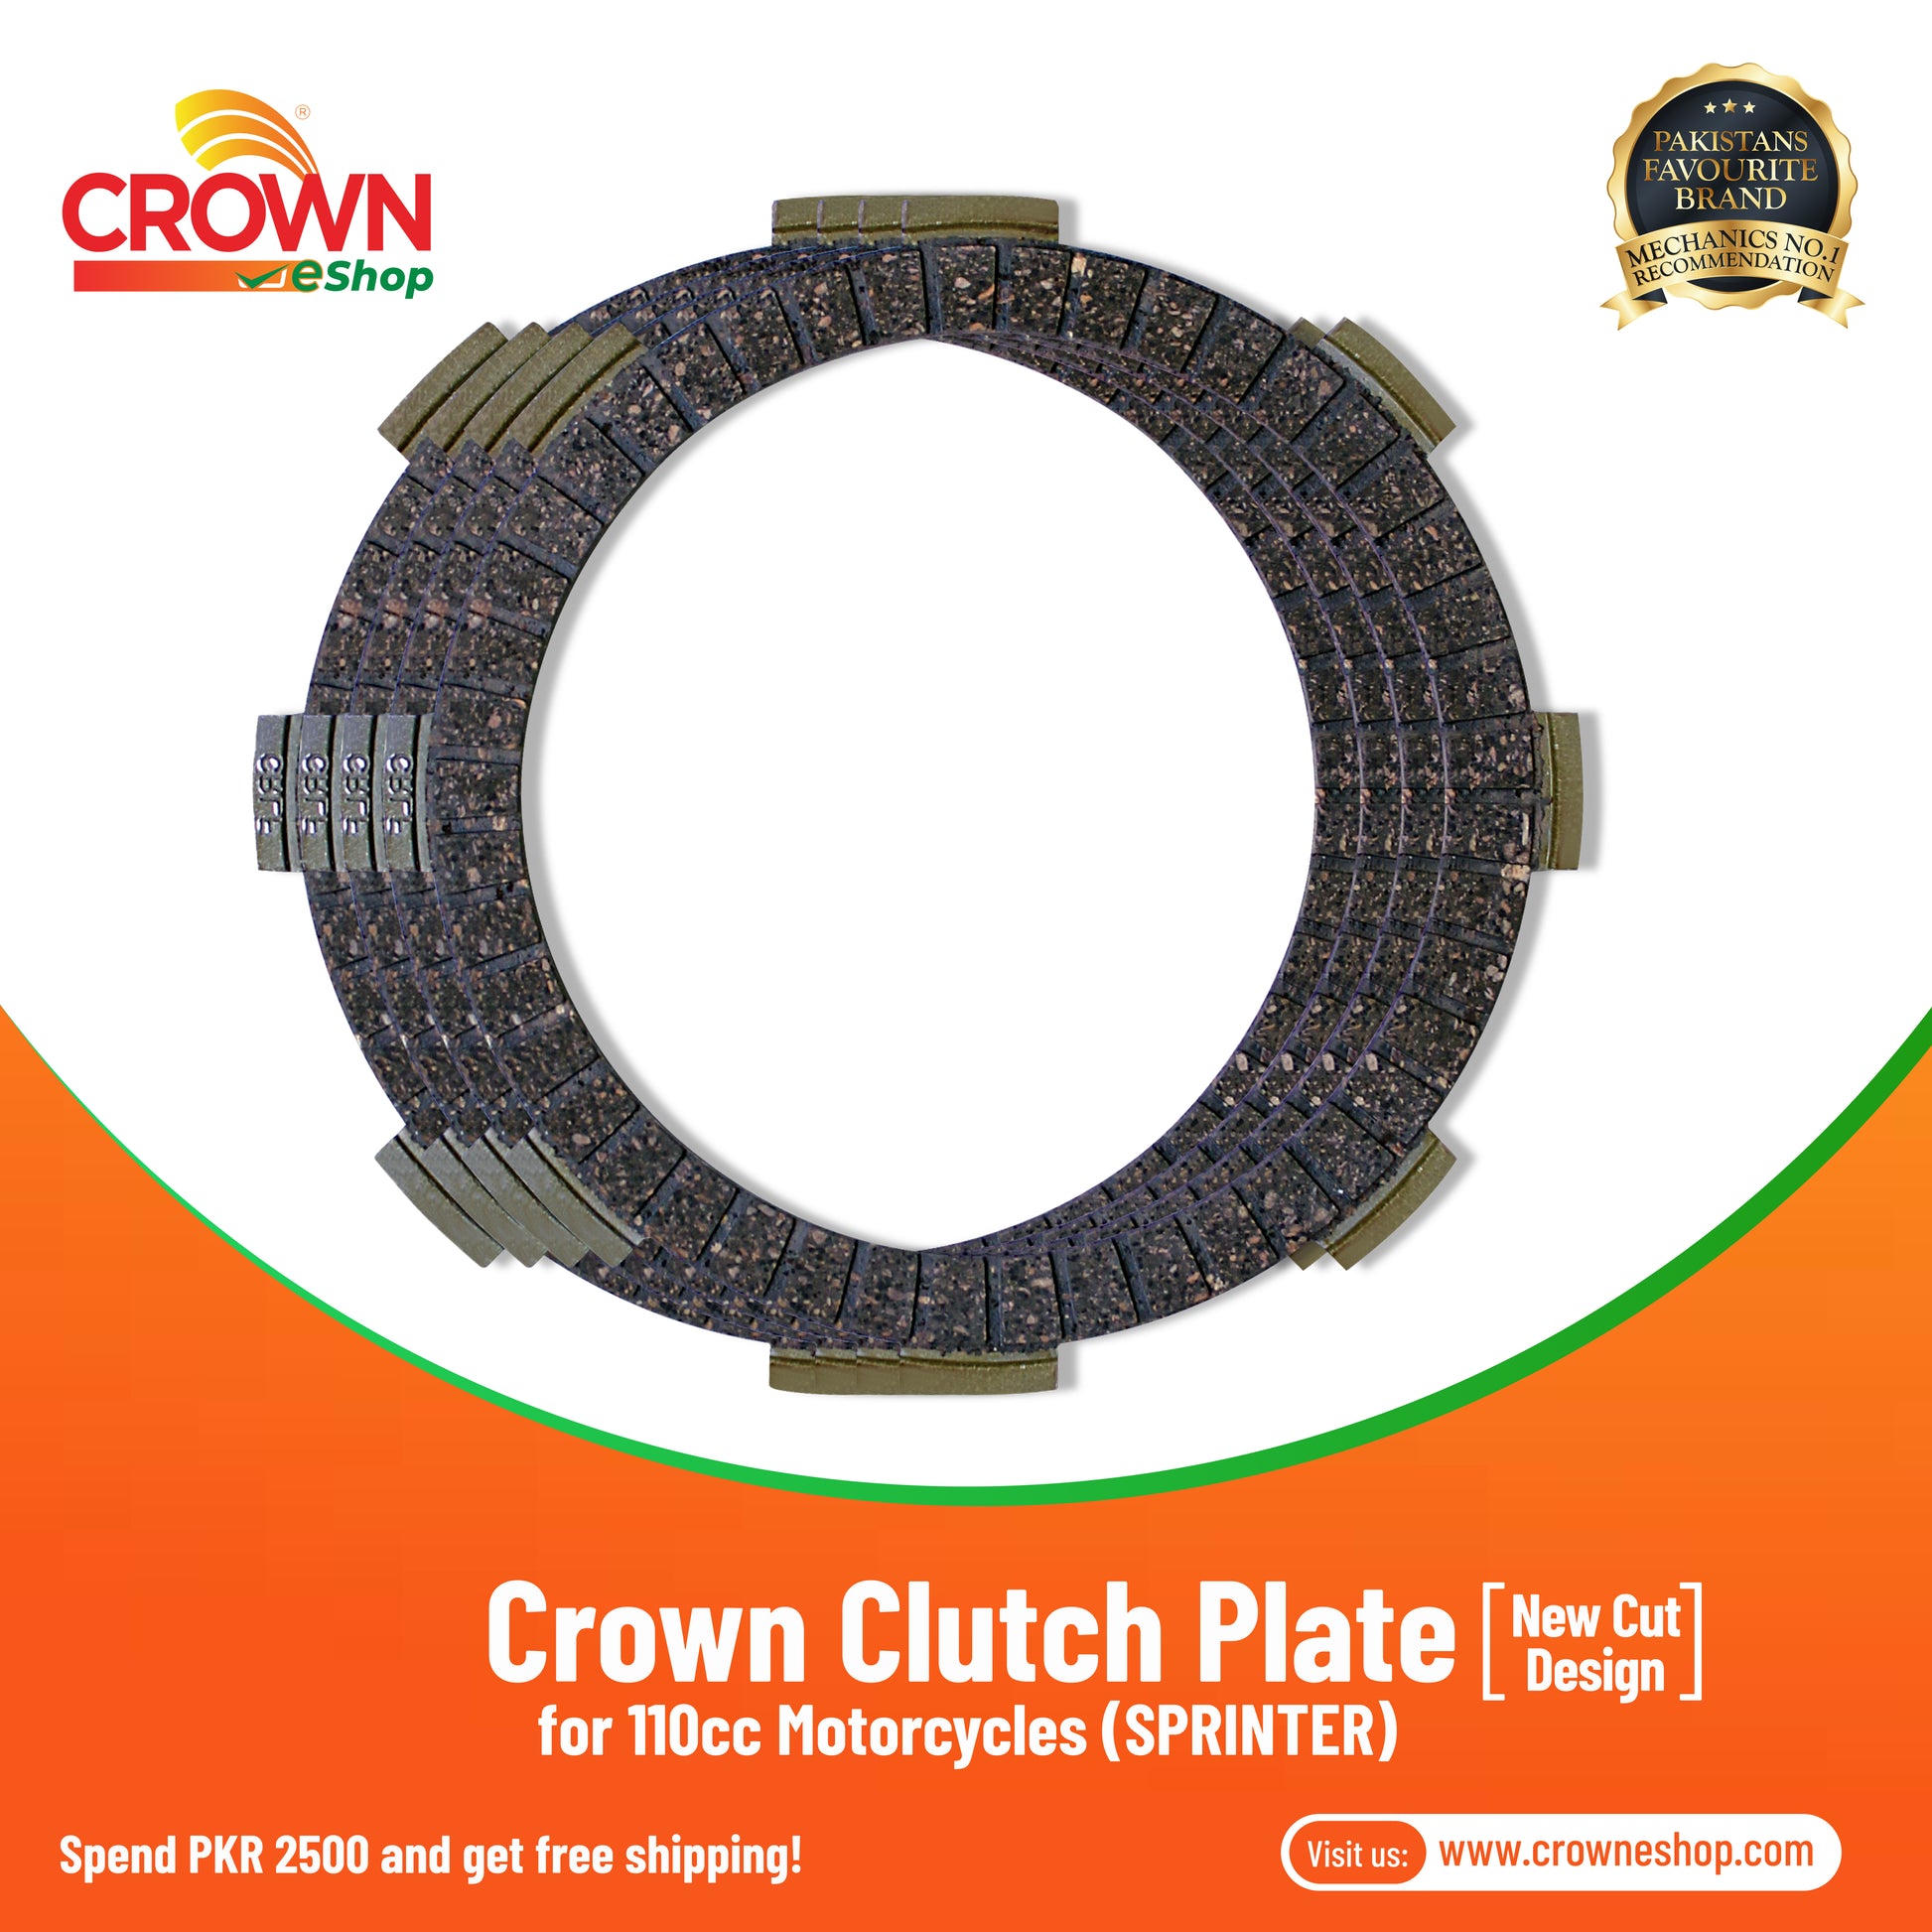 Crown Clutch Plate (New Cut Design) for 110cc Motorcycles (SPRINTER) - Crowneshop